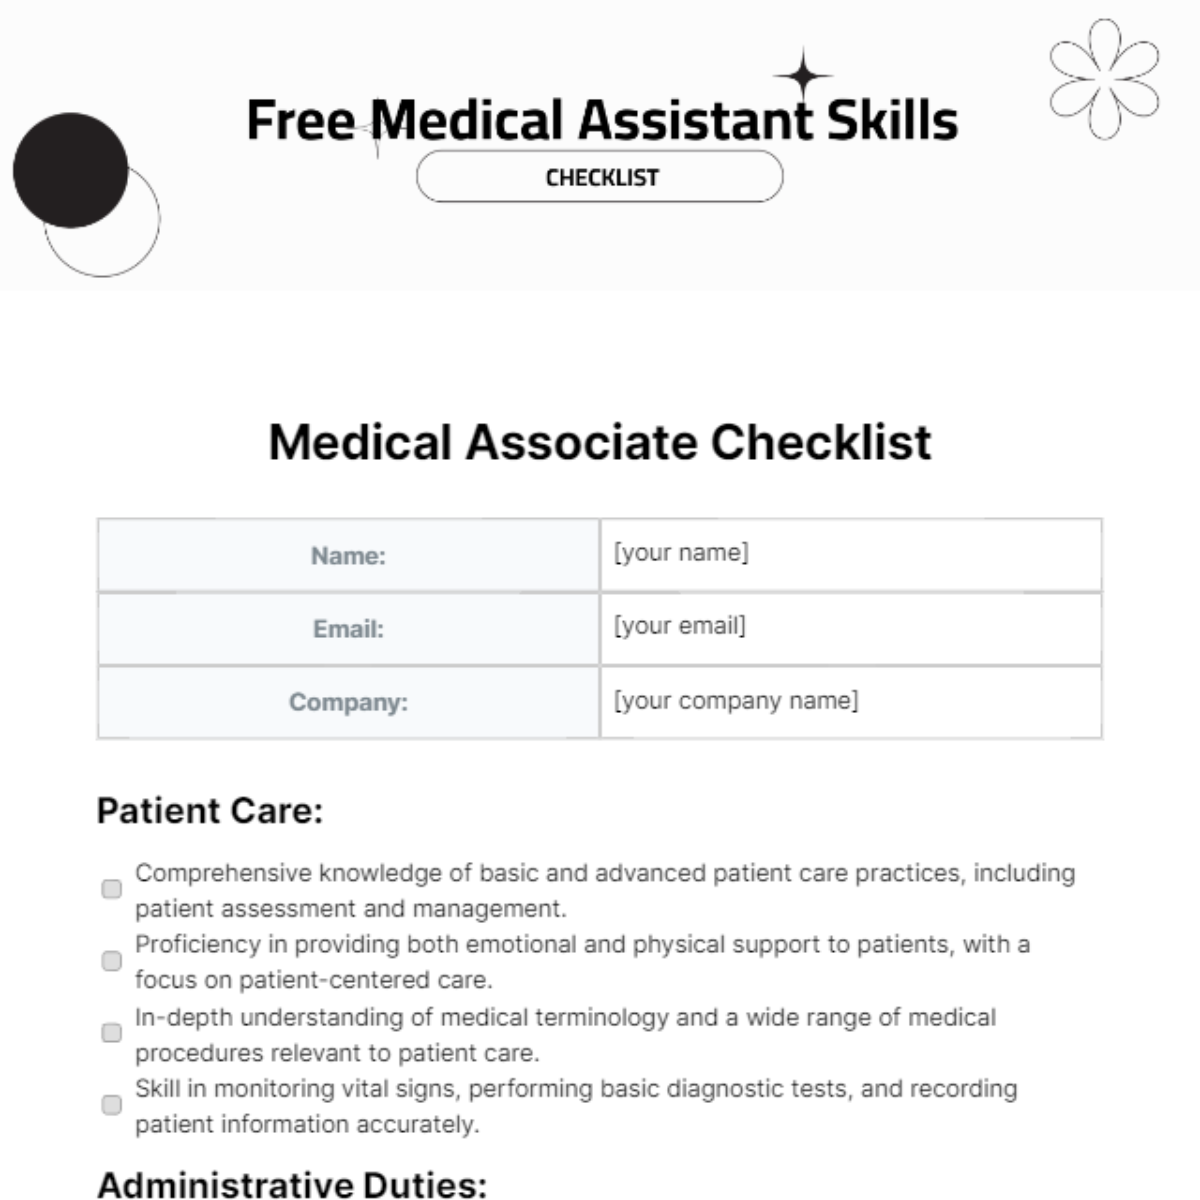 Medical Assistant Skills Checklist Template